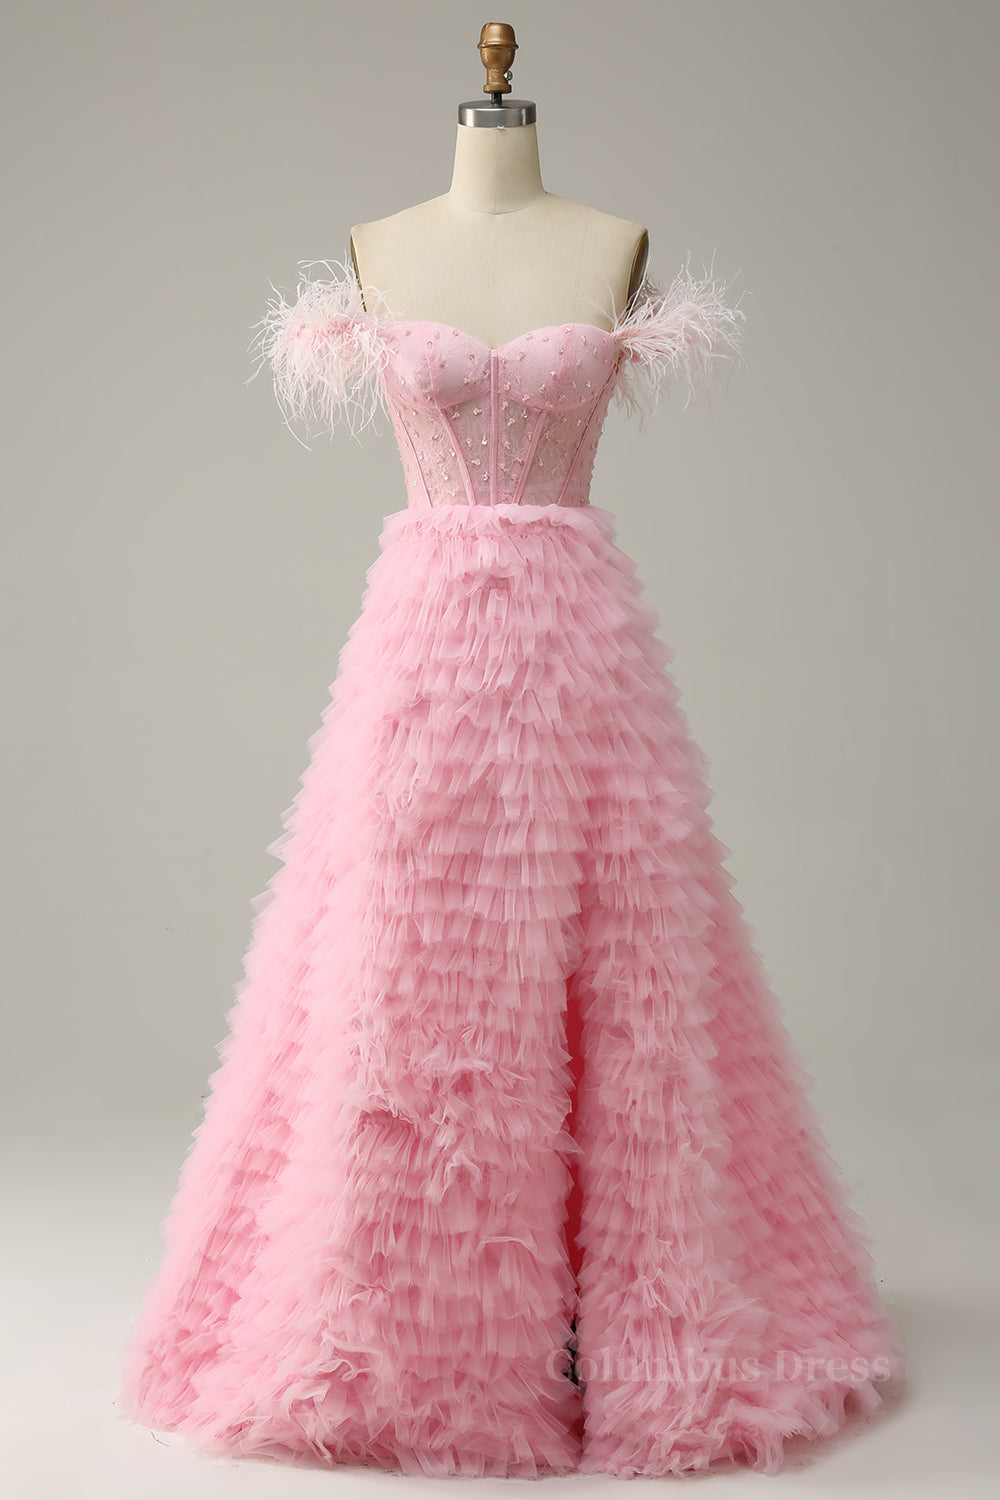 Pink Off-the-Shoulder Feathers Beaded A-line Ruffles Long Corset Prom Dress with Slit Gowns, Prom Dress Chicago